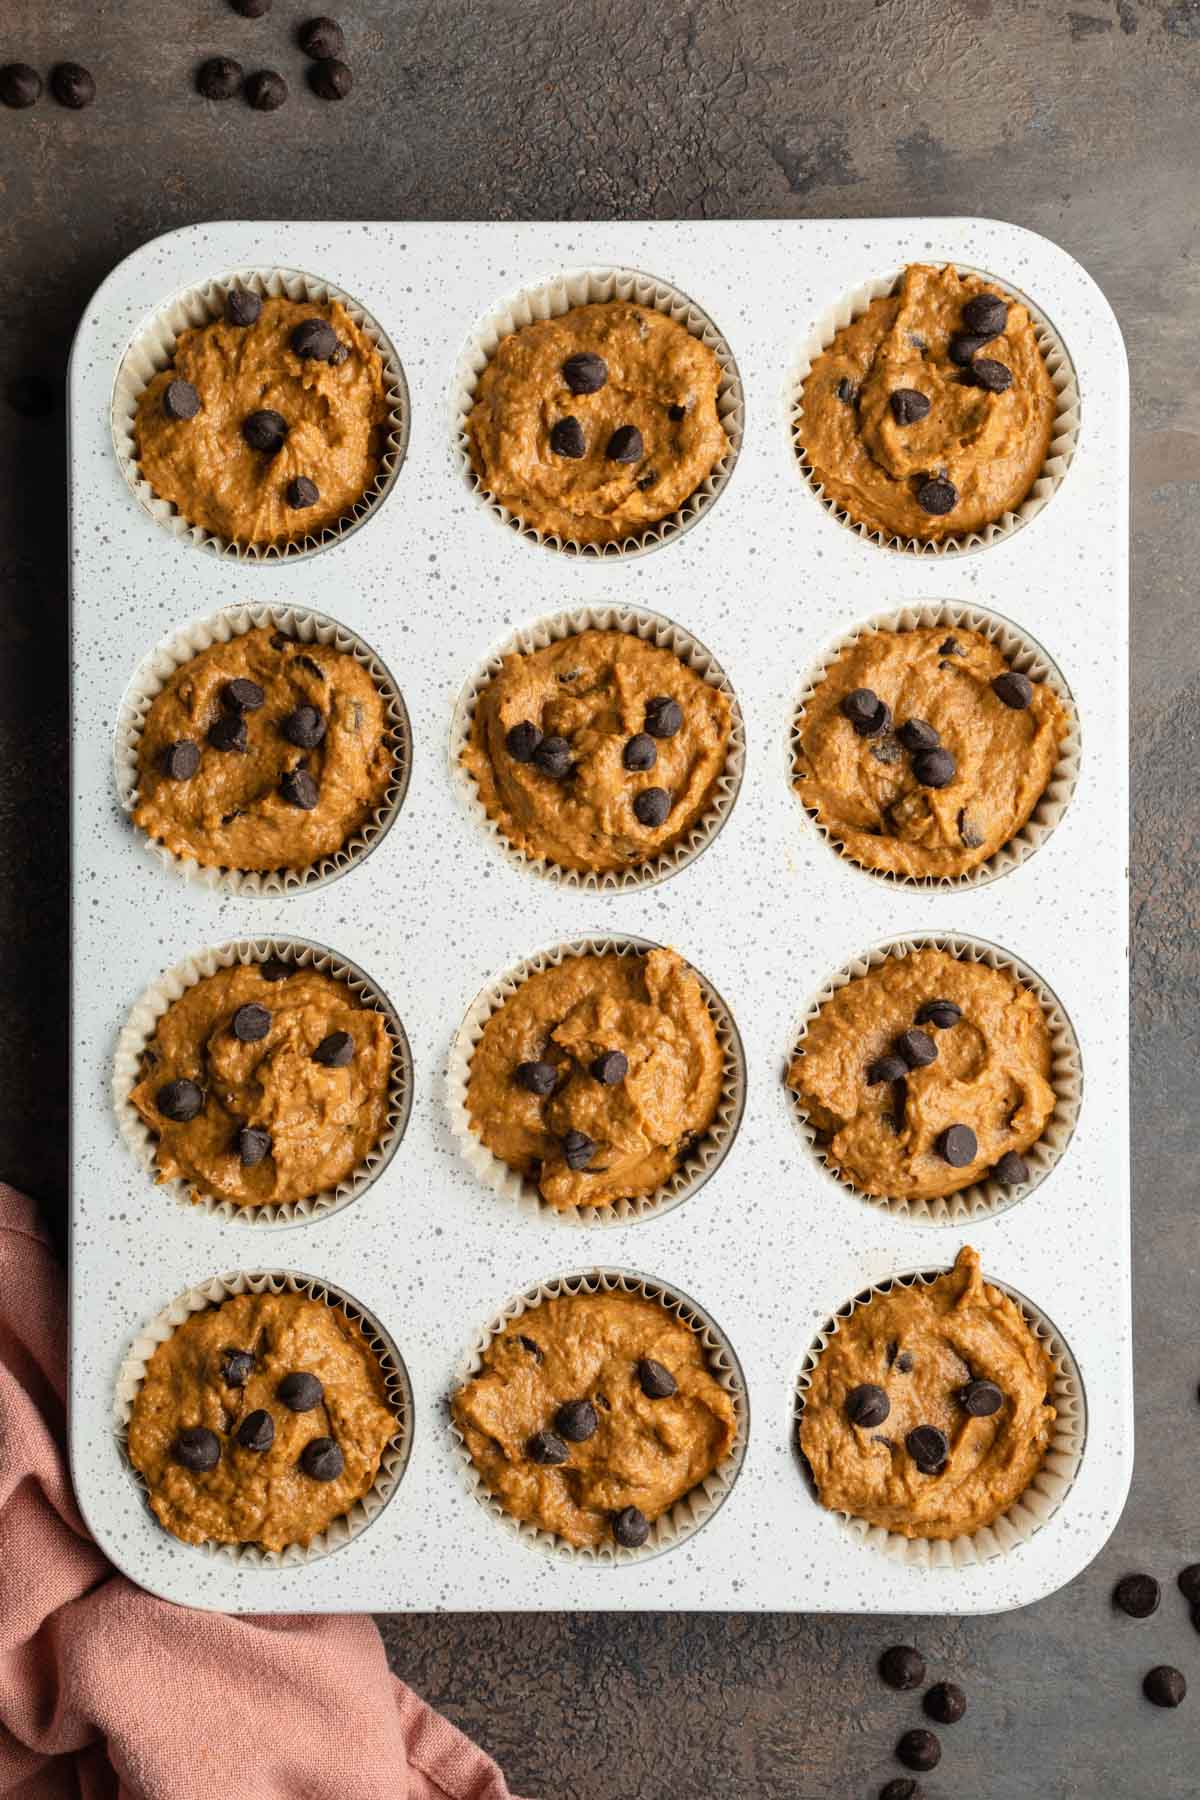 Muffin batter in a muffin pan and topped with chocolate chips.